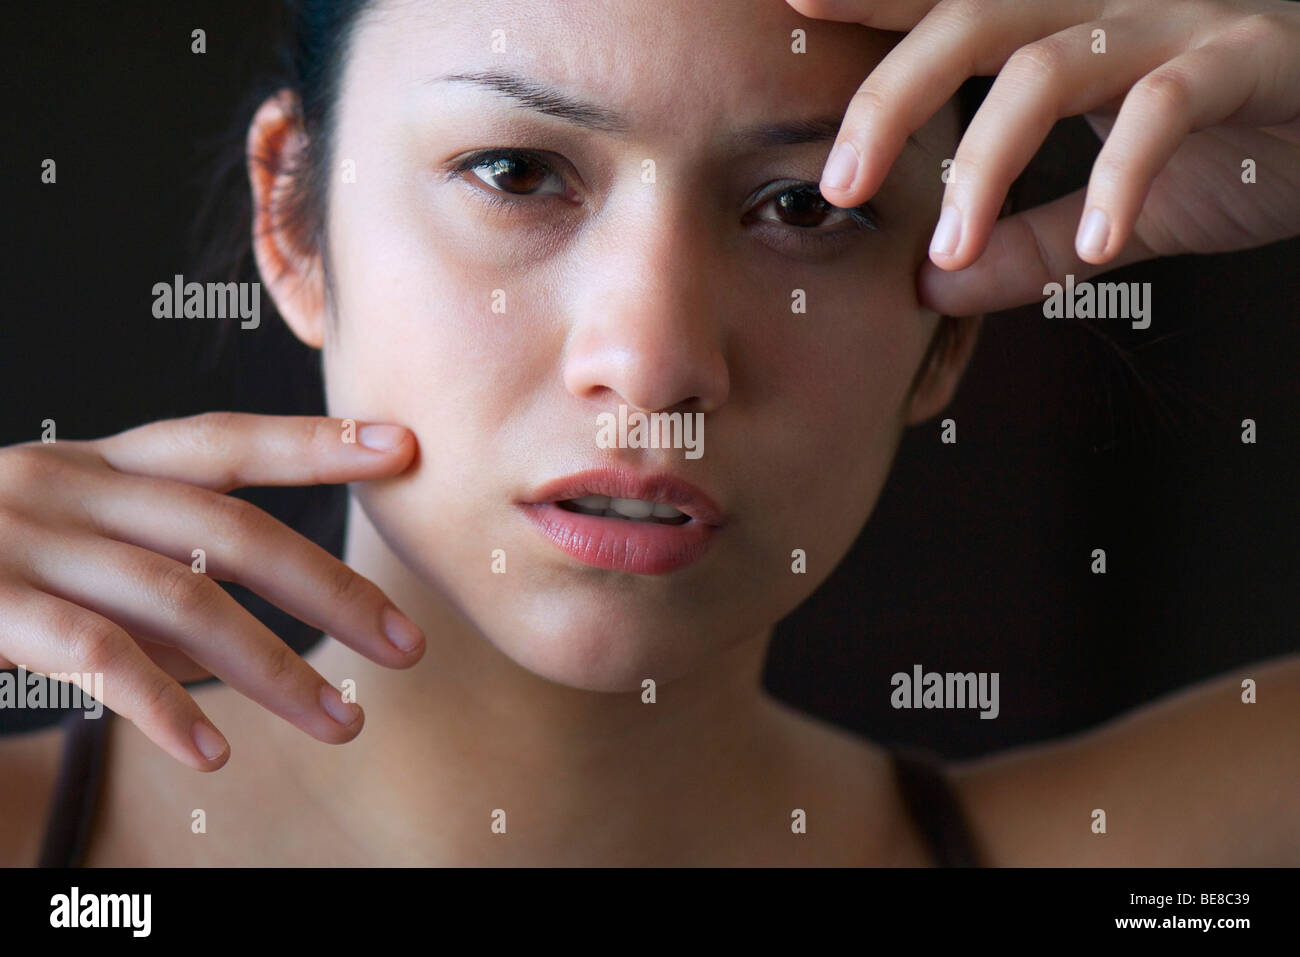 Woman with look of distress, hand's raised Stock Photo